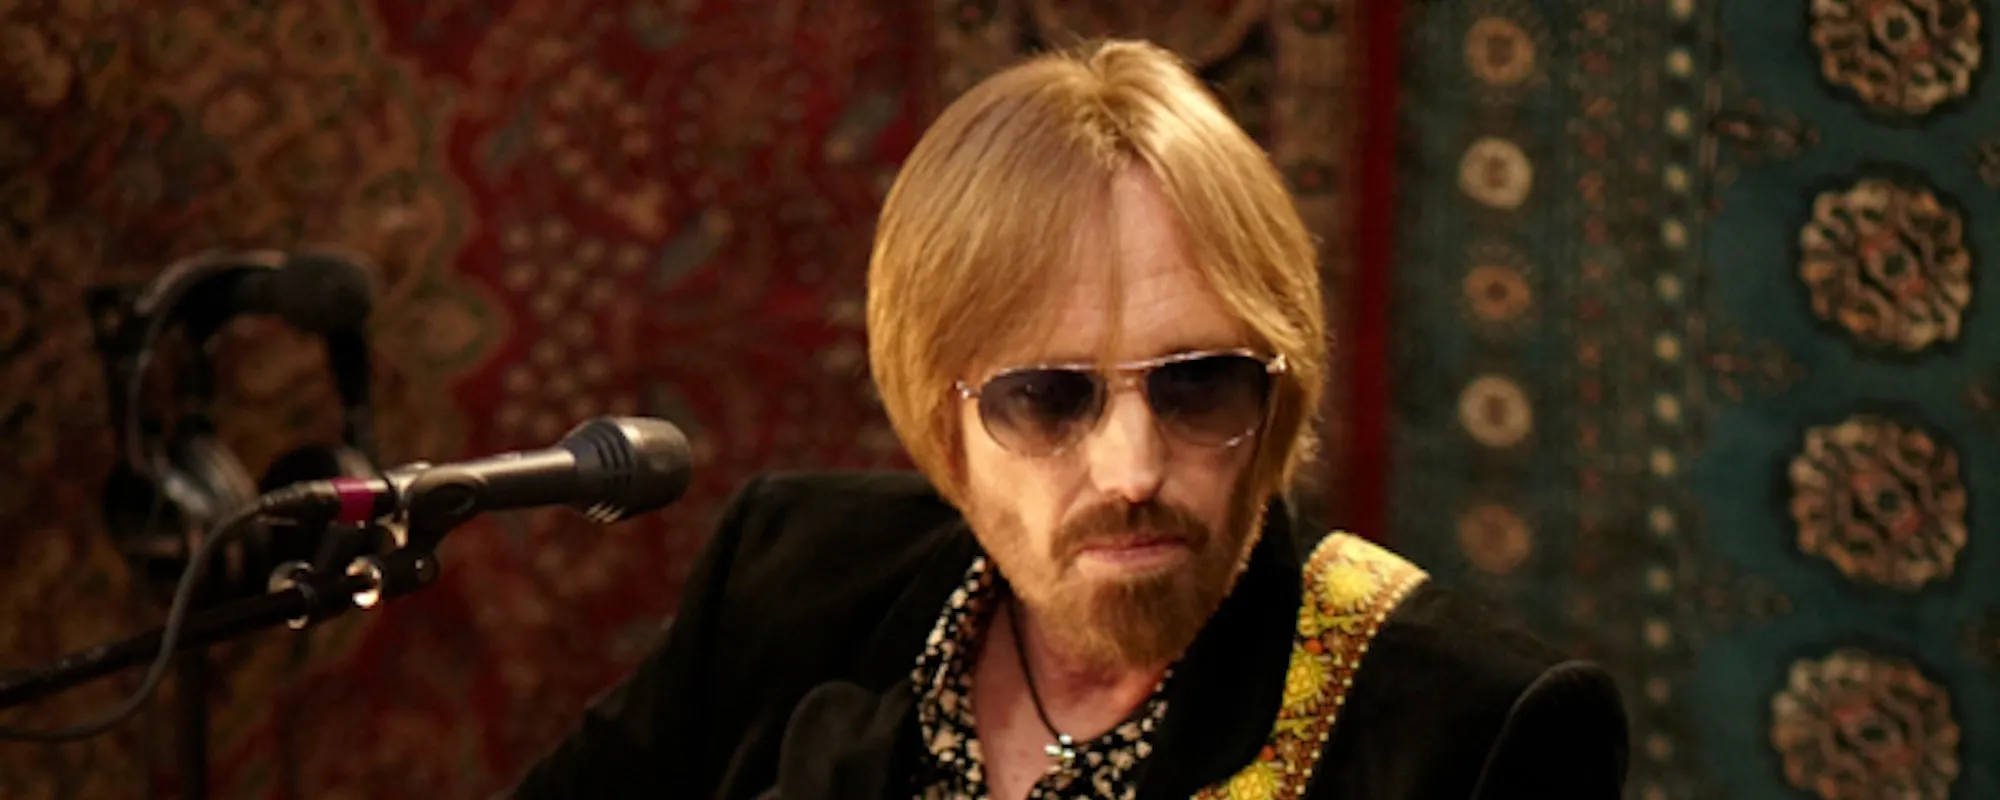 The Tom Petty Song That Tom Petty Hated